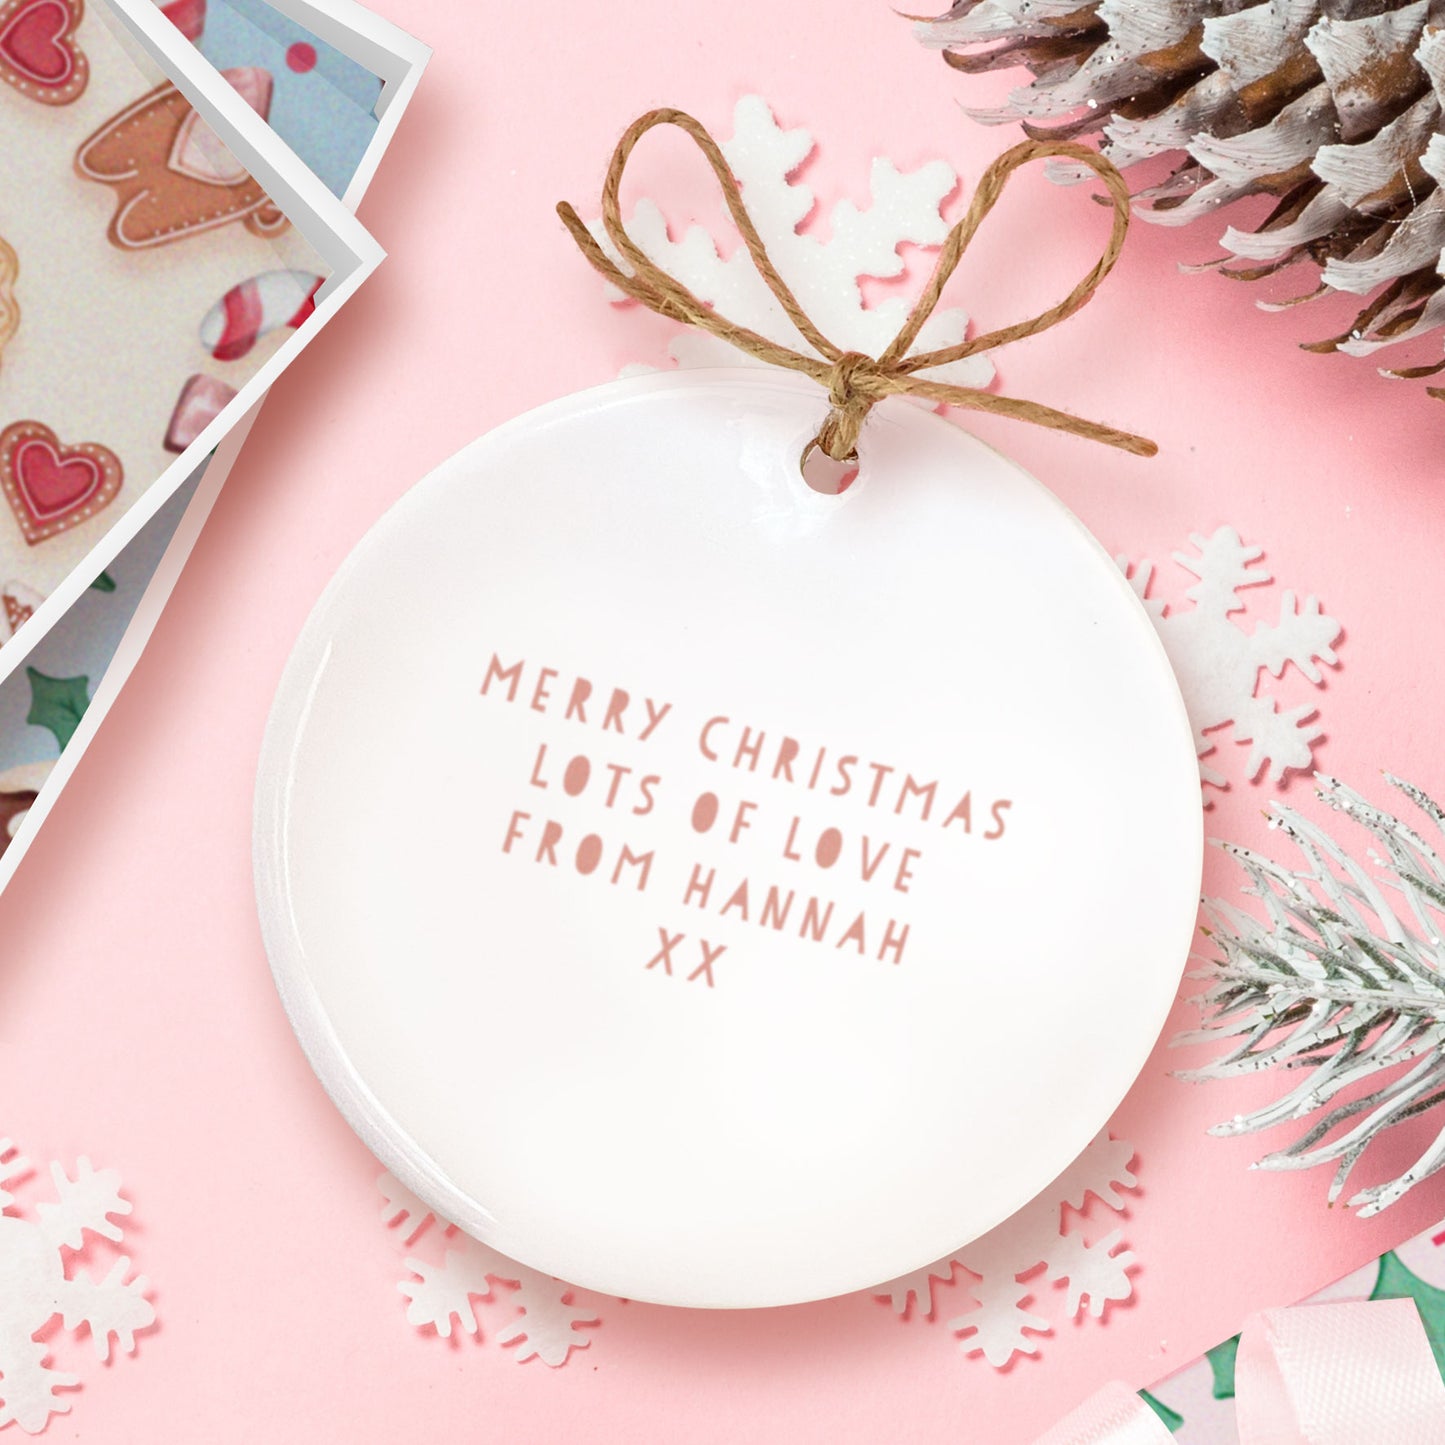 Mince Pies Before Guys Ceramic Decoration. Christmas Bauble. Personalised Christmas Ceramic ornament